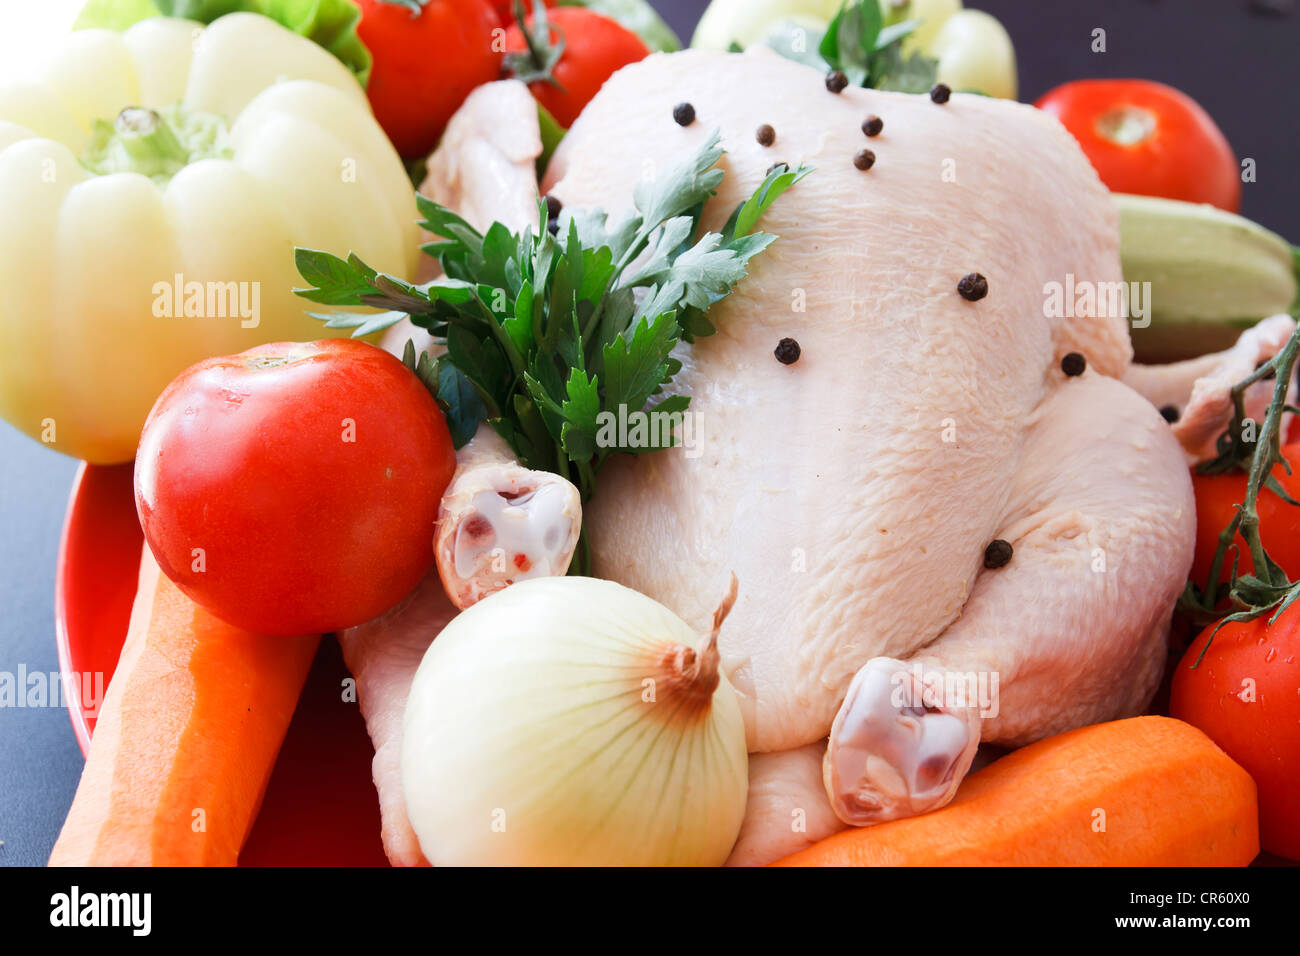 Whole raw chicken with vegetables and pepper Stock Photo